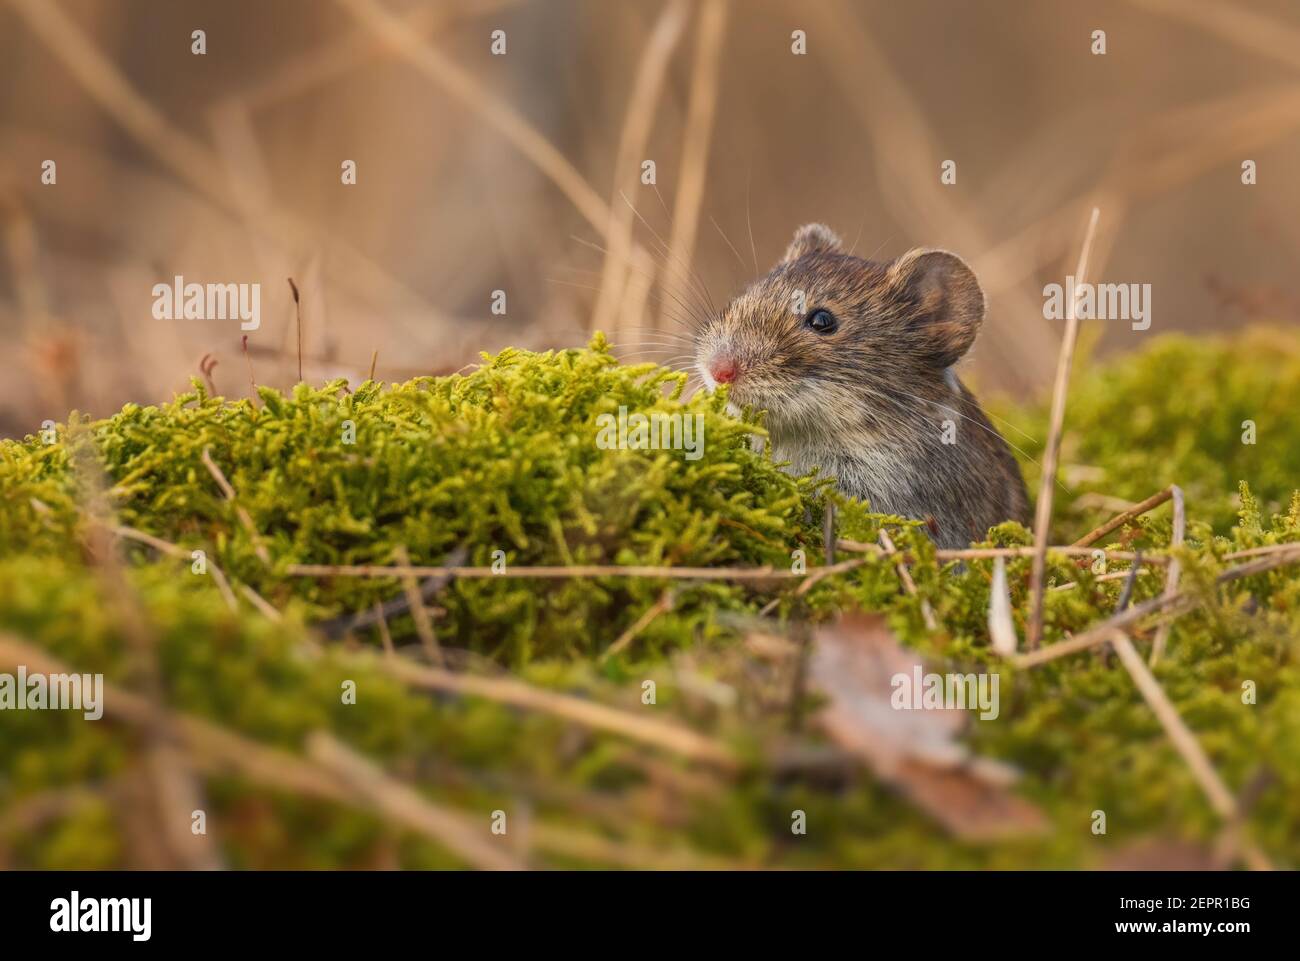 Common Vole - Microtus arvalis, common small rodent from European meadows, grasslands and fields, Zlin, Czech Republic. Stock Photo